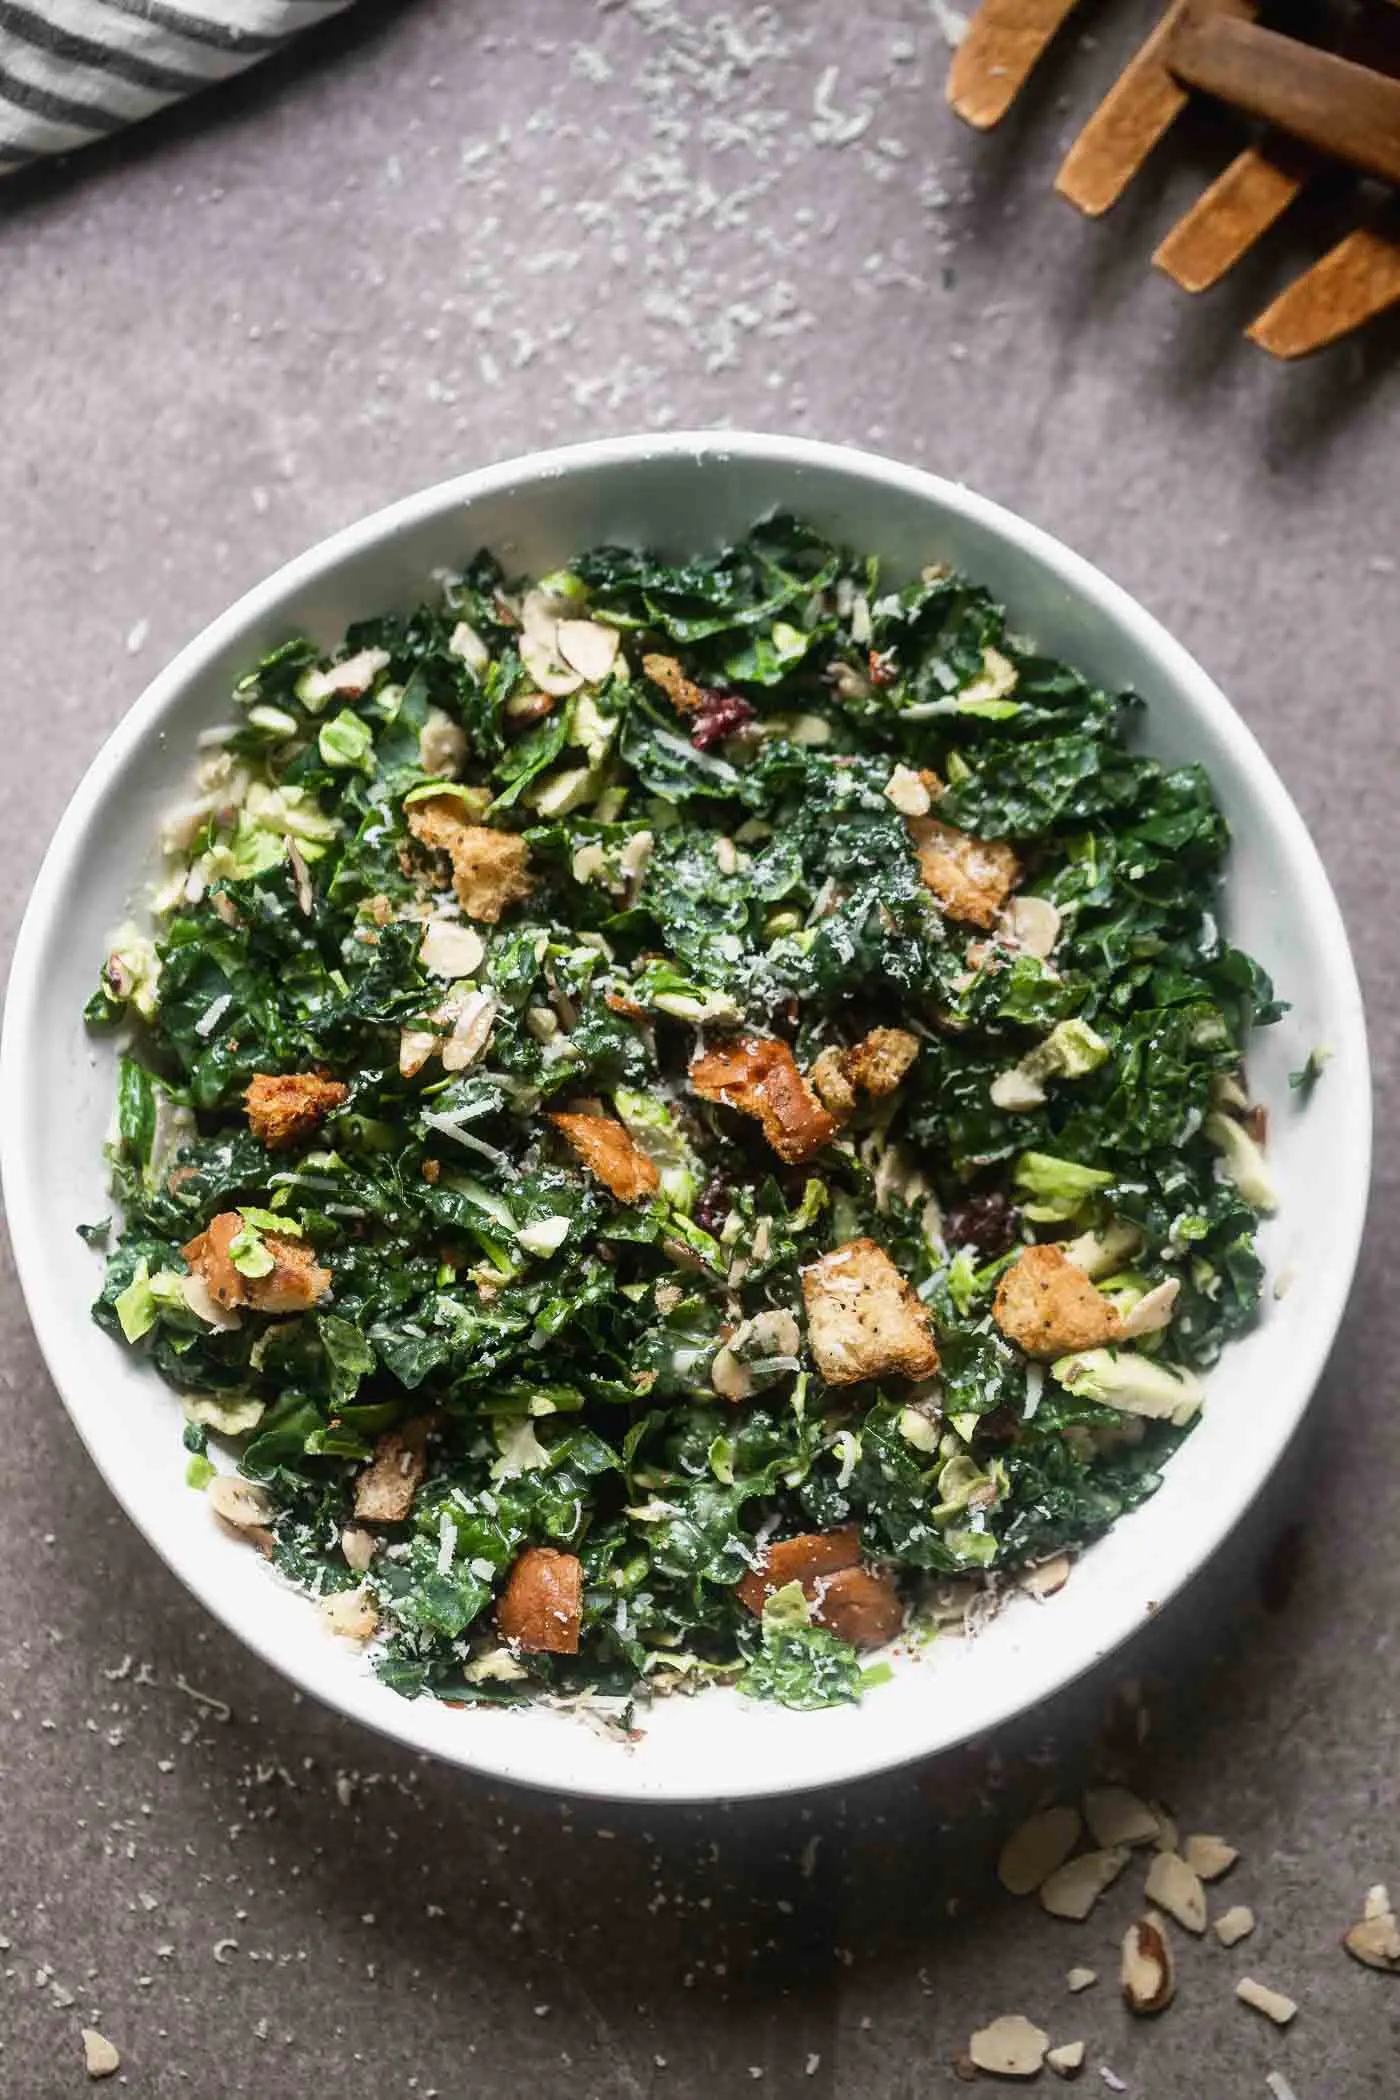 Everyday Kale and Brussels Sprout Salad